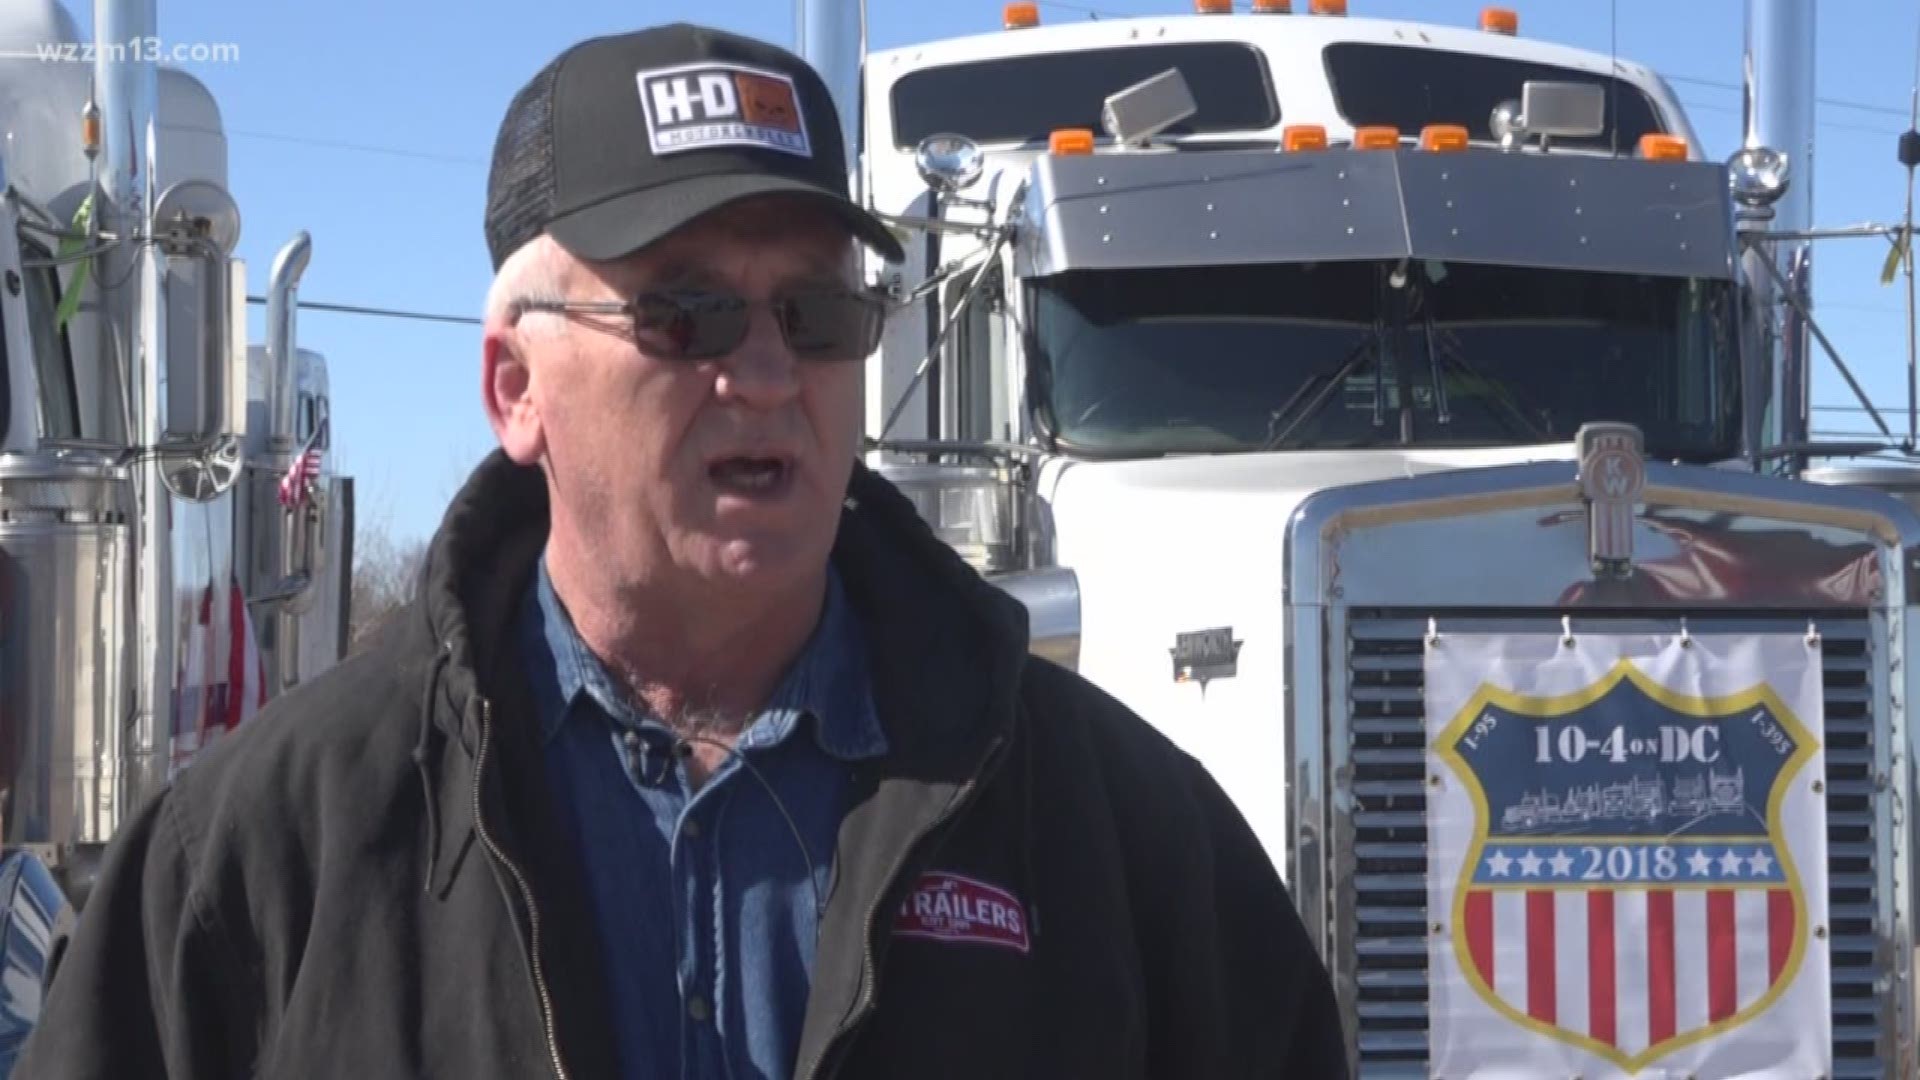 Michigan truckers protest working conditions